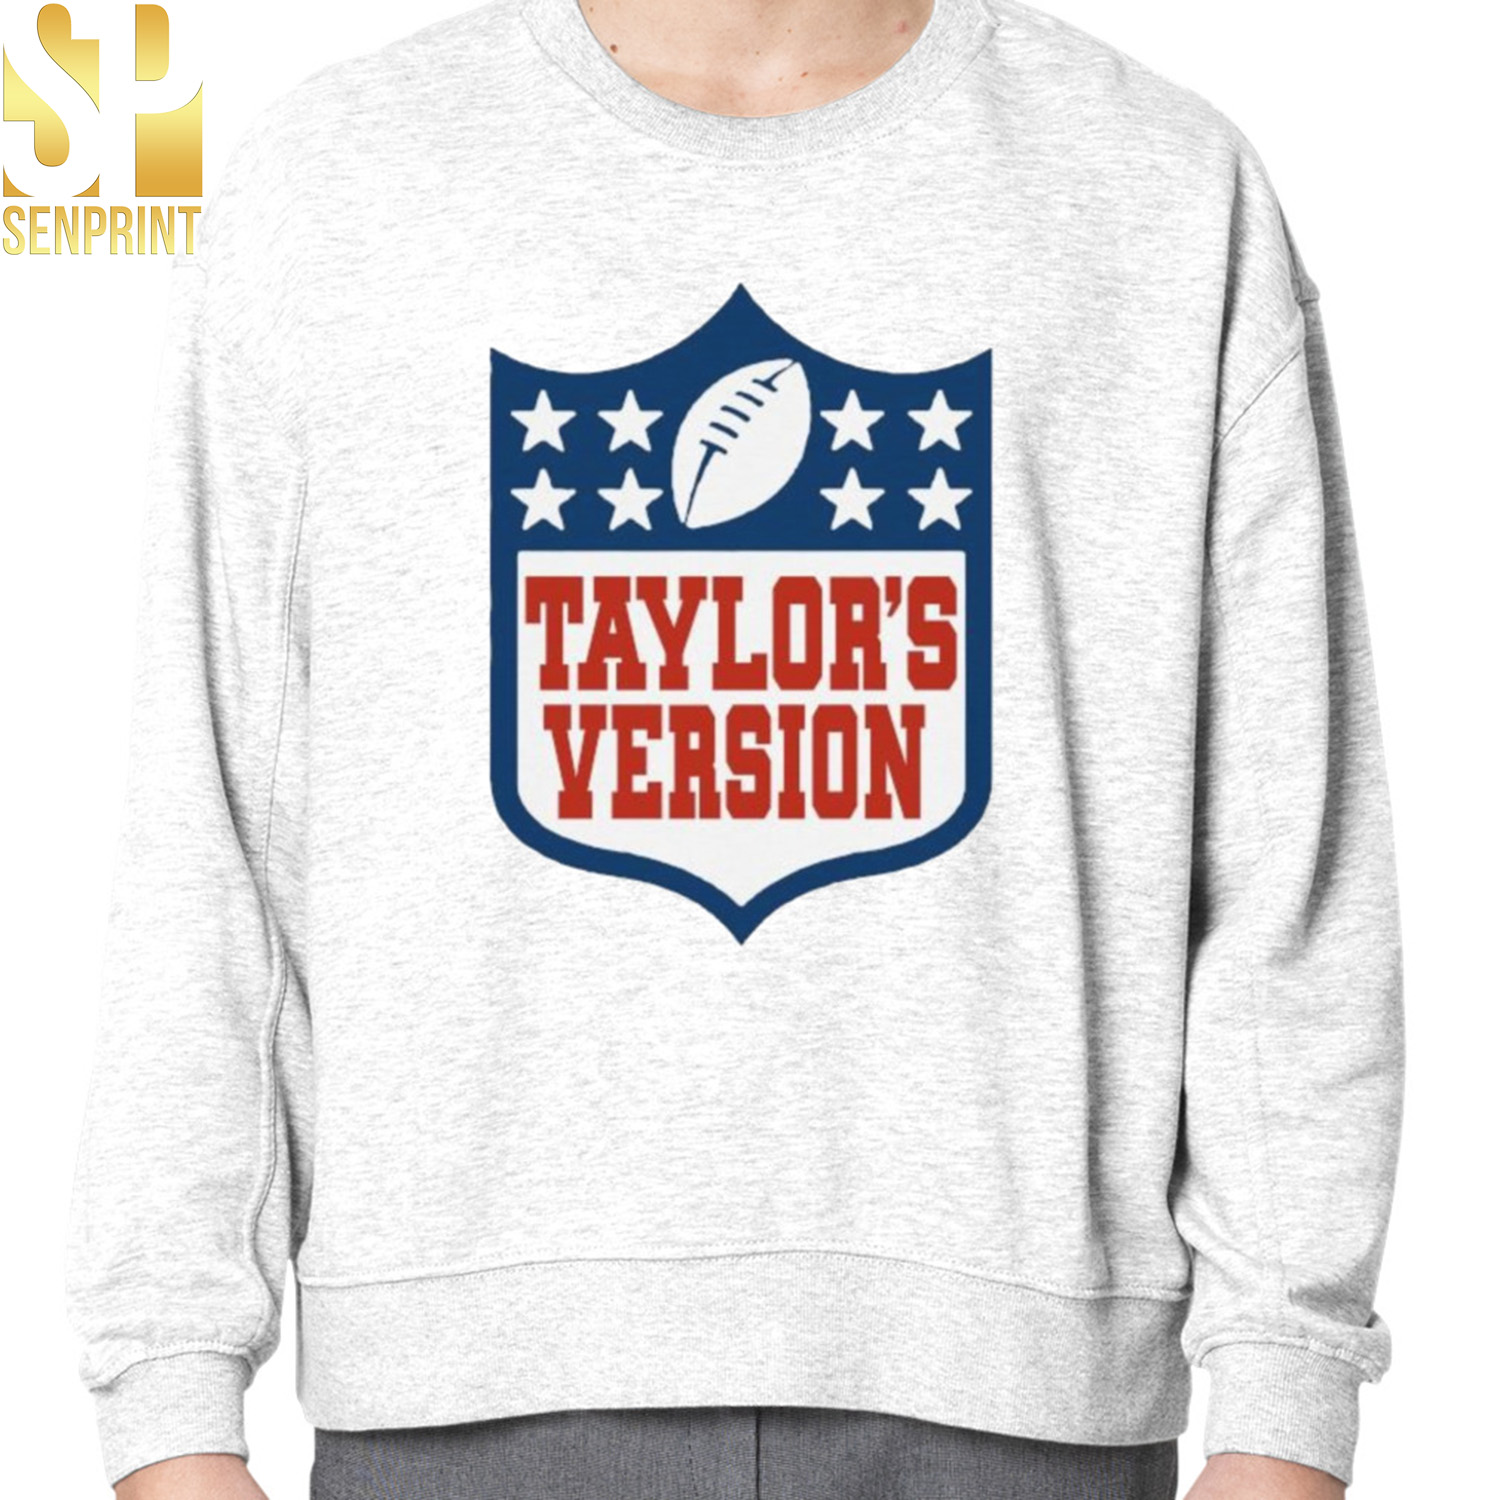 Taylor Swift's 'Open Invitation' to NFL Fans The Taylor's Version NFL Sweatshirt